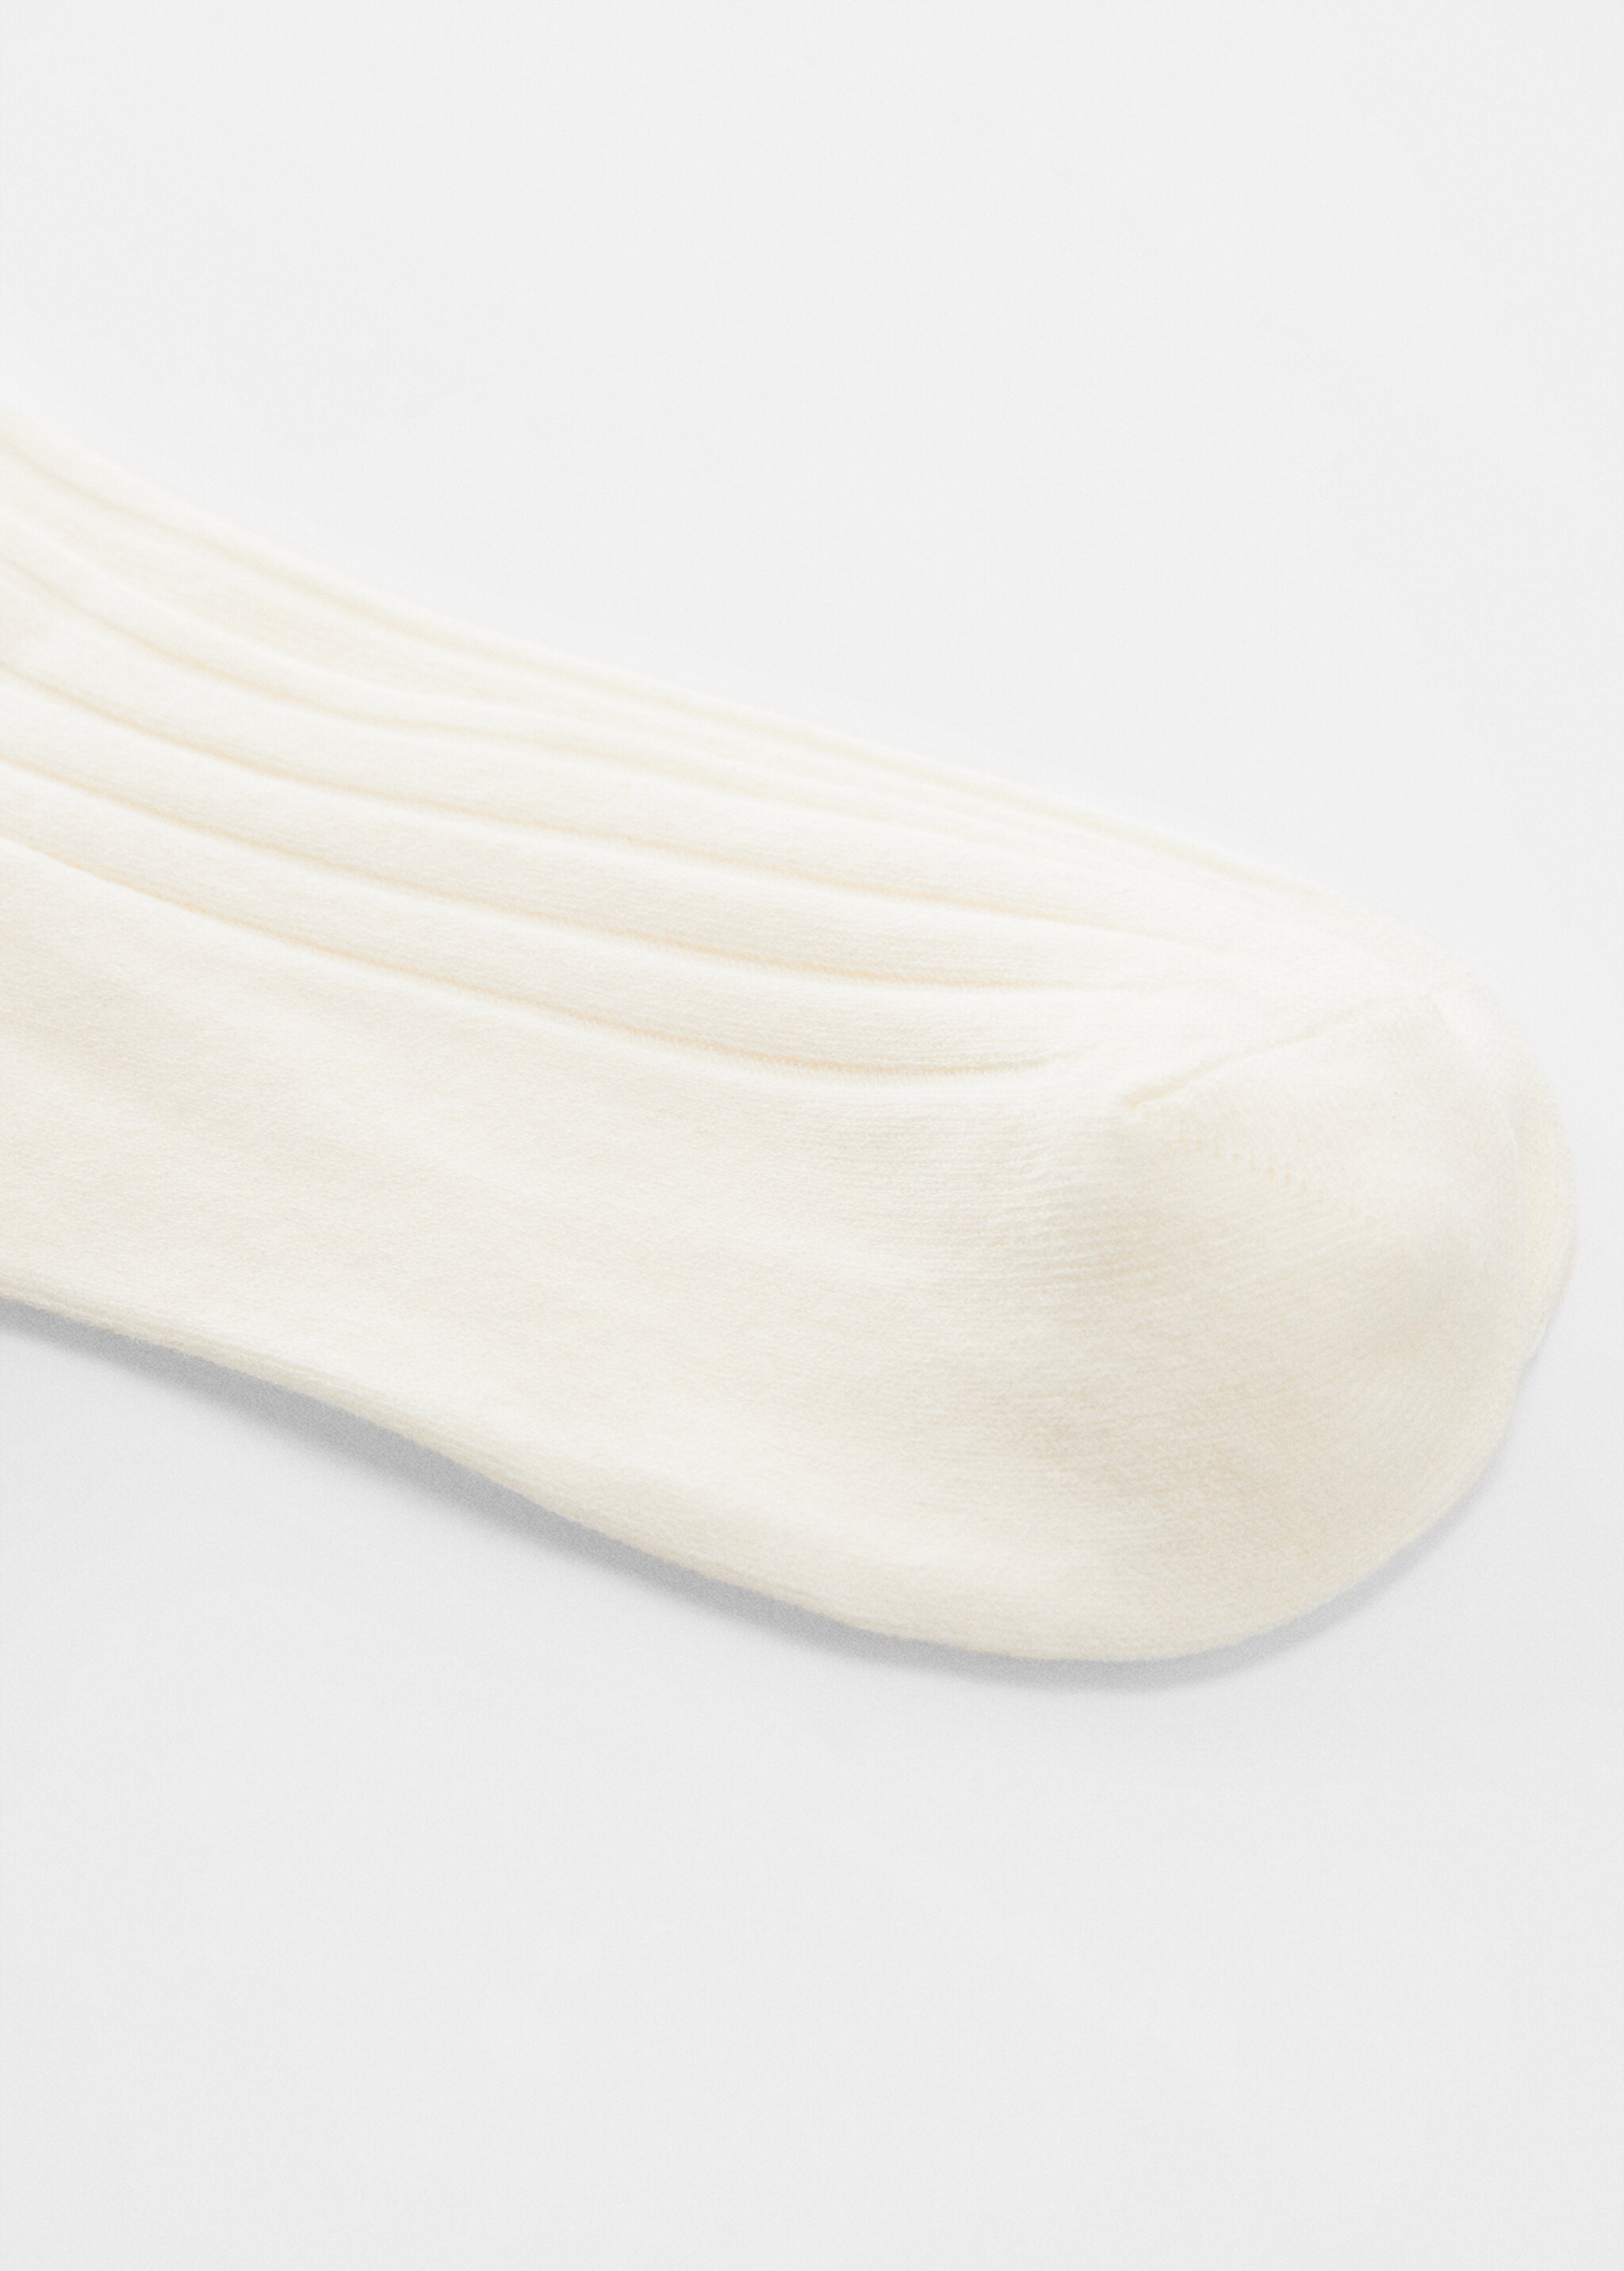 Ribbed socks - Details of the article 2